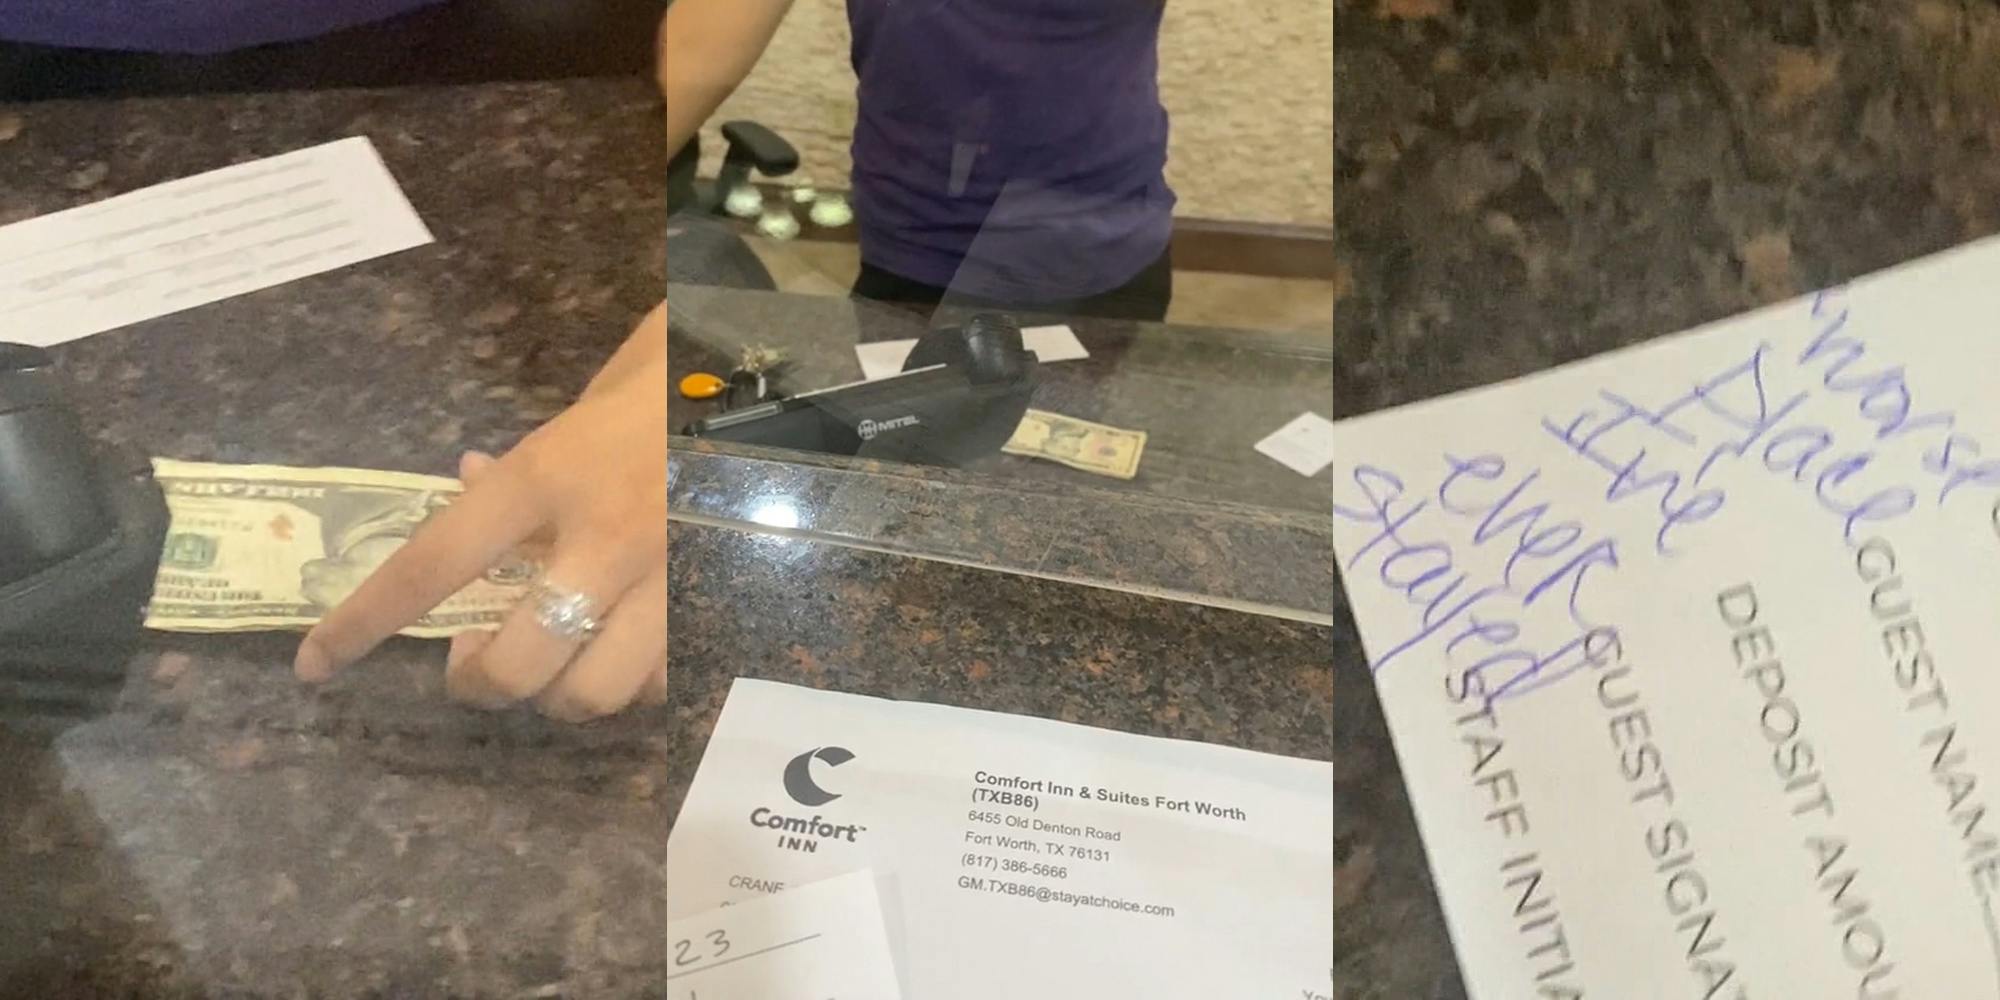 hotel worker behind counter with cash (l) hotel worker behind counter with cash speaking to guest (c) deposit return slip for hotel with written message "worse place I've ever stayed" (r)